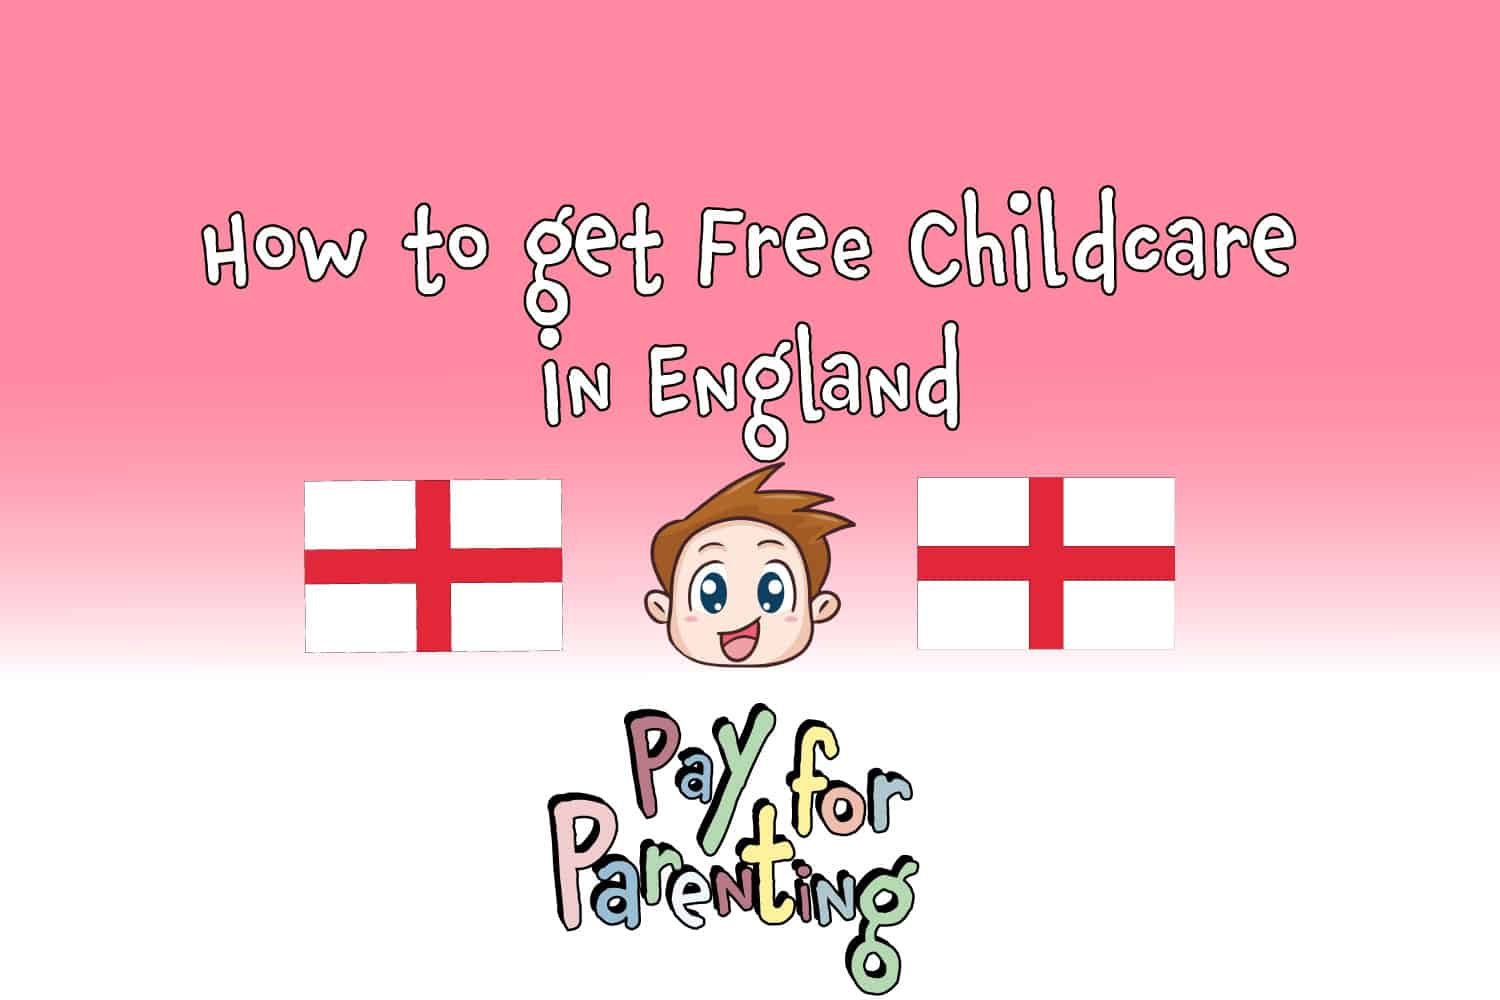 how-to-get-free-childcare-in-england-don-t-miss-out-pay-for-parenting